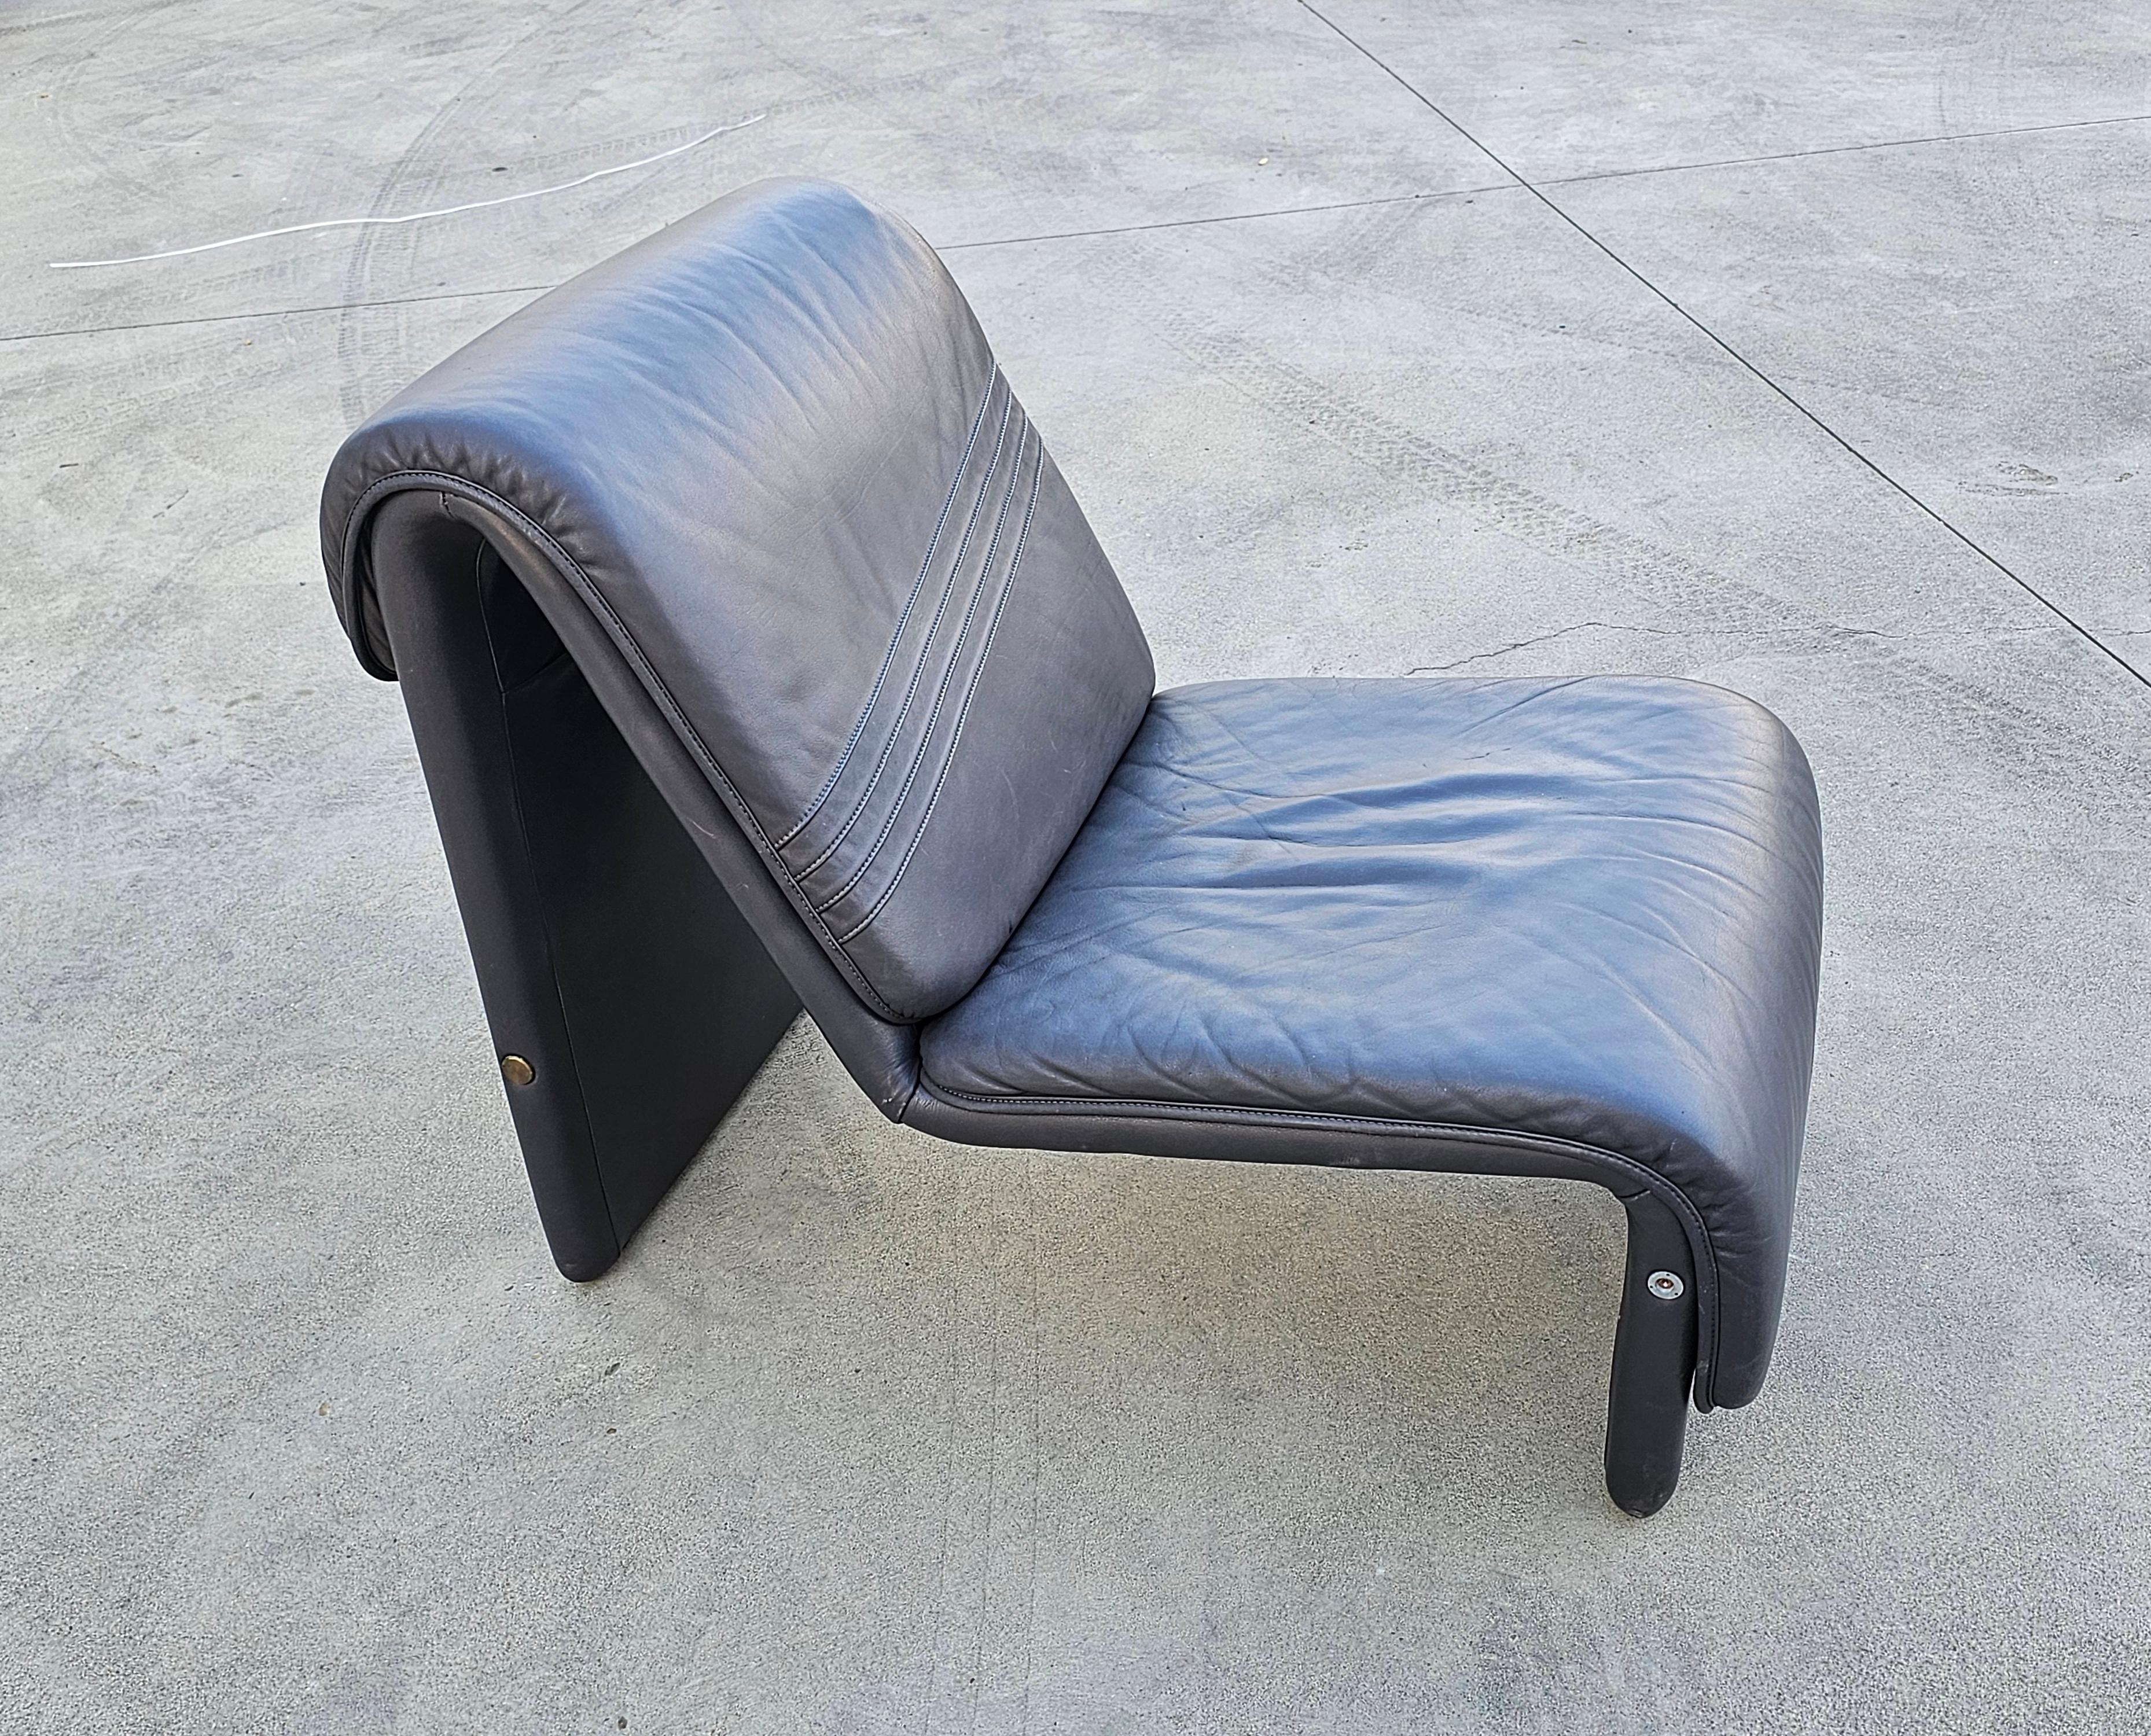 Postmodern Leather Lounge Chairs in style of Etienne Fermigier, Switzerland 1978 For Sale 2